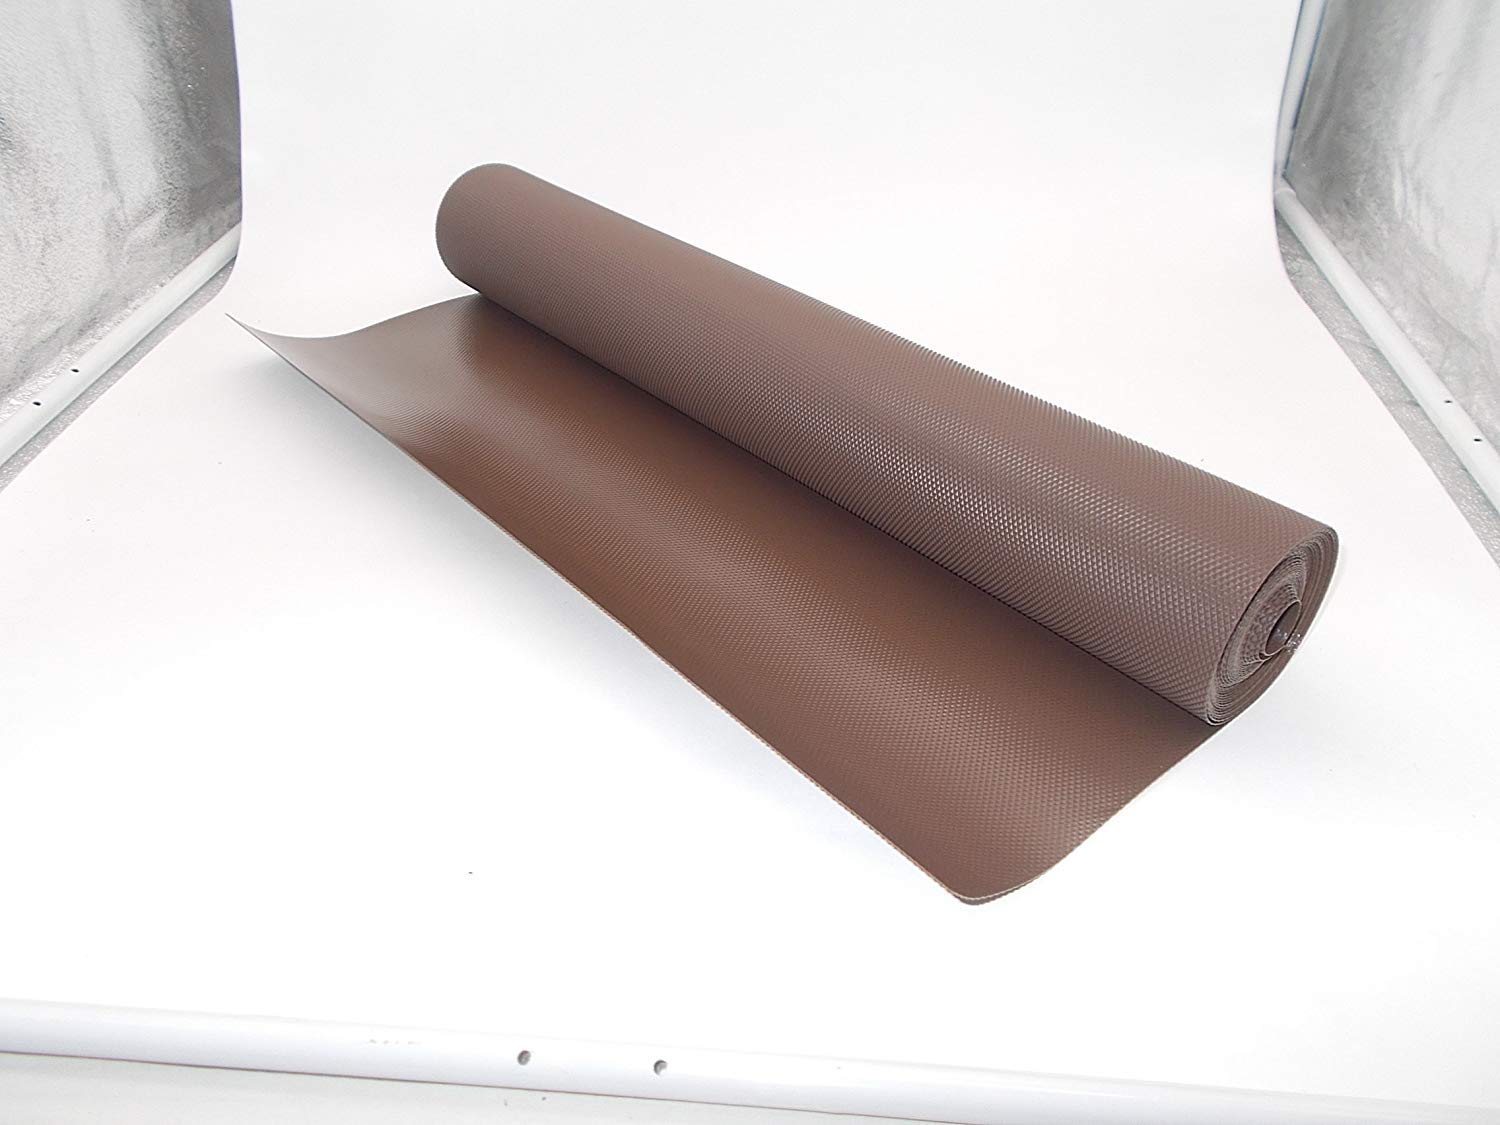 Kuber Industries Multipurpose Textured Super Strong Anti-Anti Skid Mats and Liners for Drawer, Refrigerator, Cupboard, Shelf, Cabinet, Wardrobe, Fridge and Dining - Size 45X500cm (5 Meter Roll, Brown)